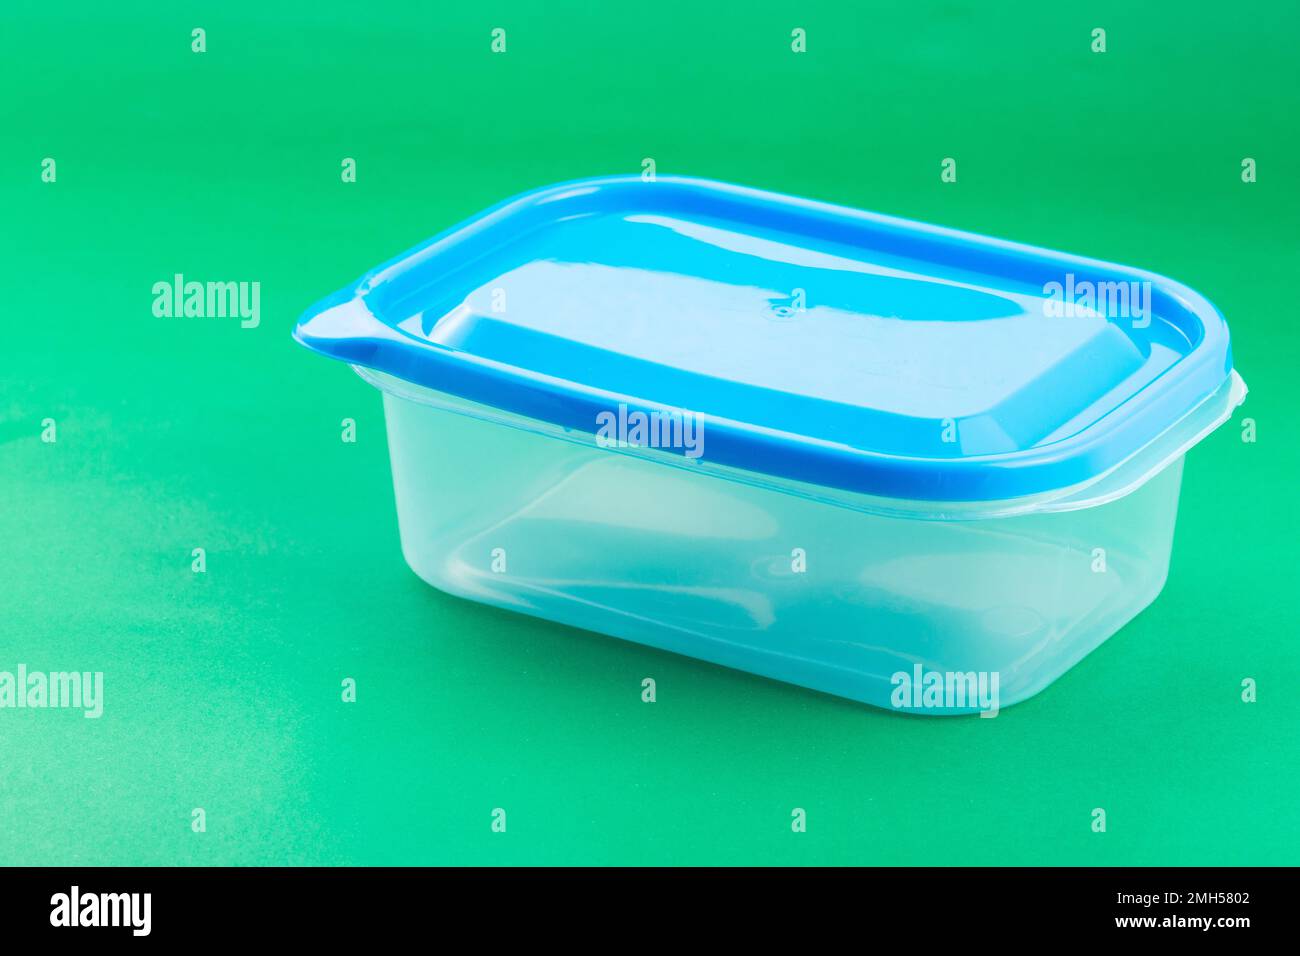 https://c8.alamy.com/comp/2MH5802/container-with-lid-for-food-on-green-background-2MH5802.jpg